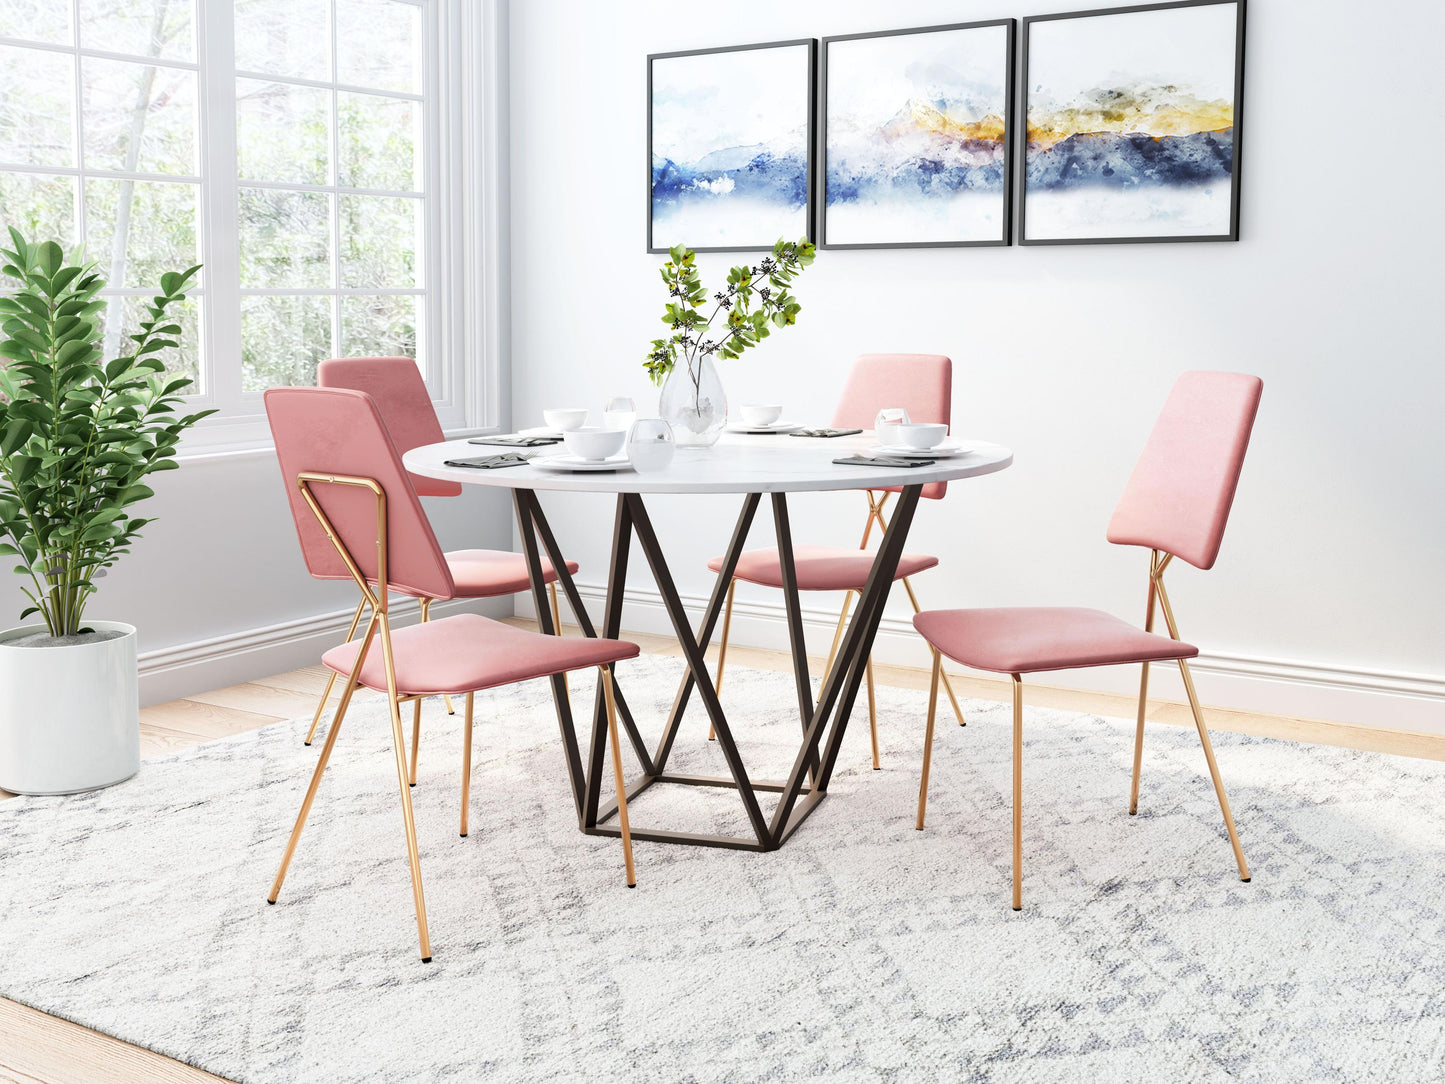 Chloe Dining Chair Pink & Gold